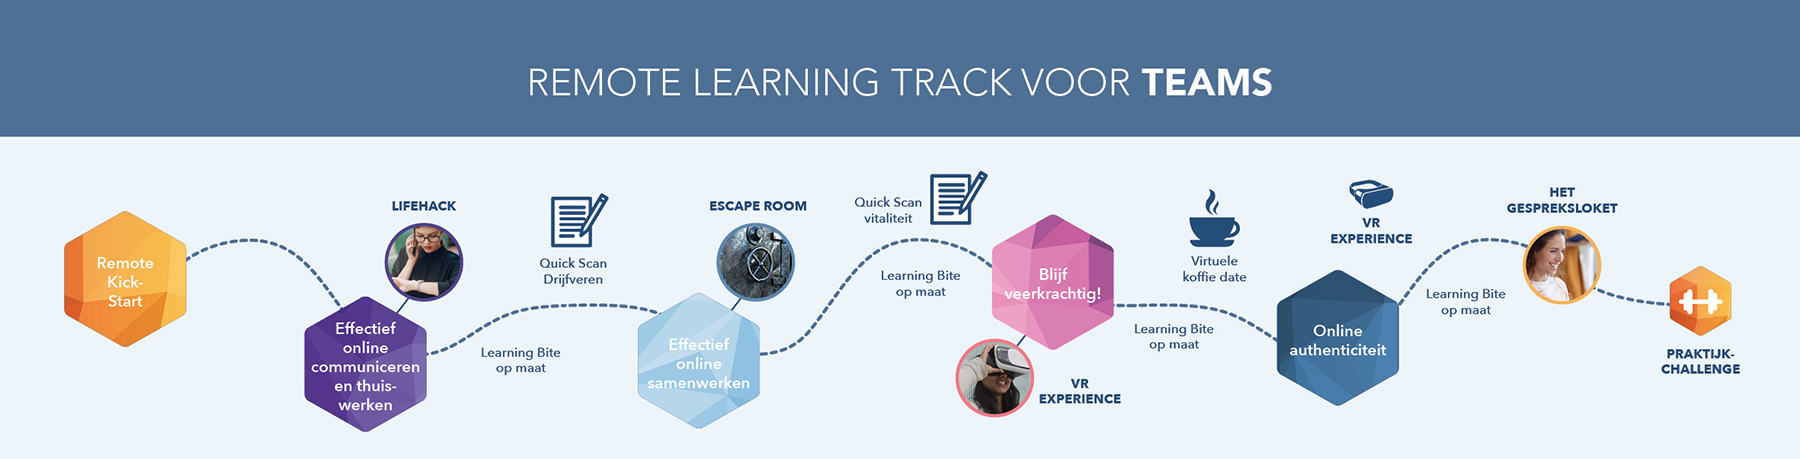 Infographic van Remote Learning Track